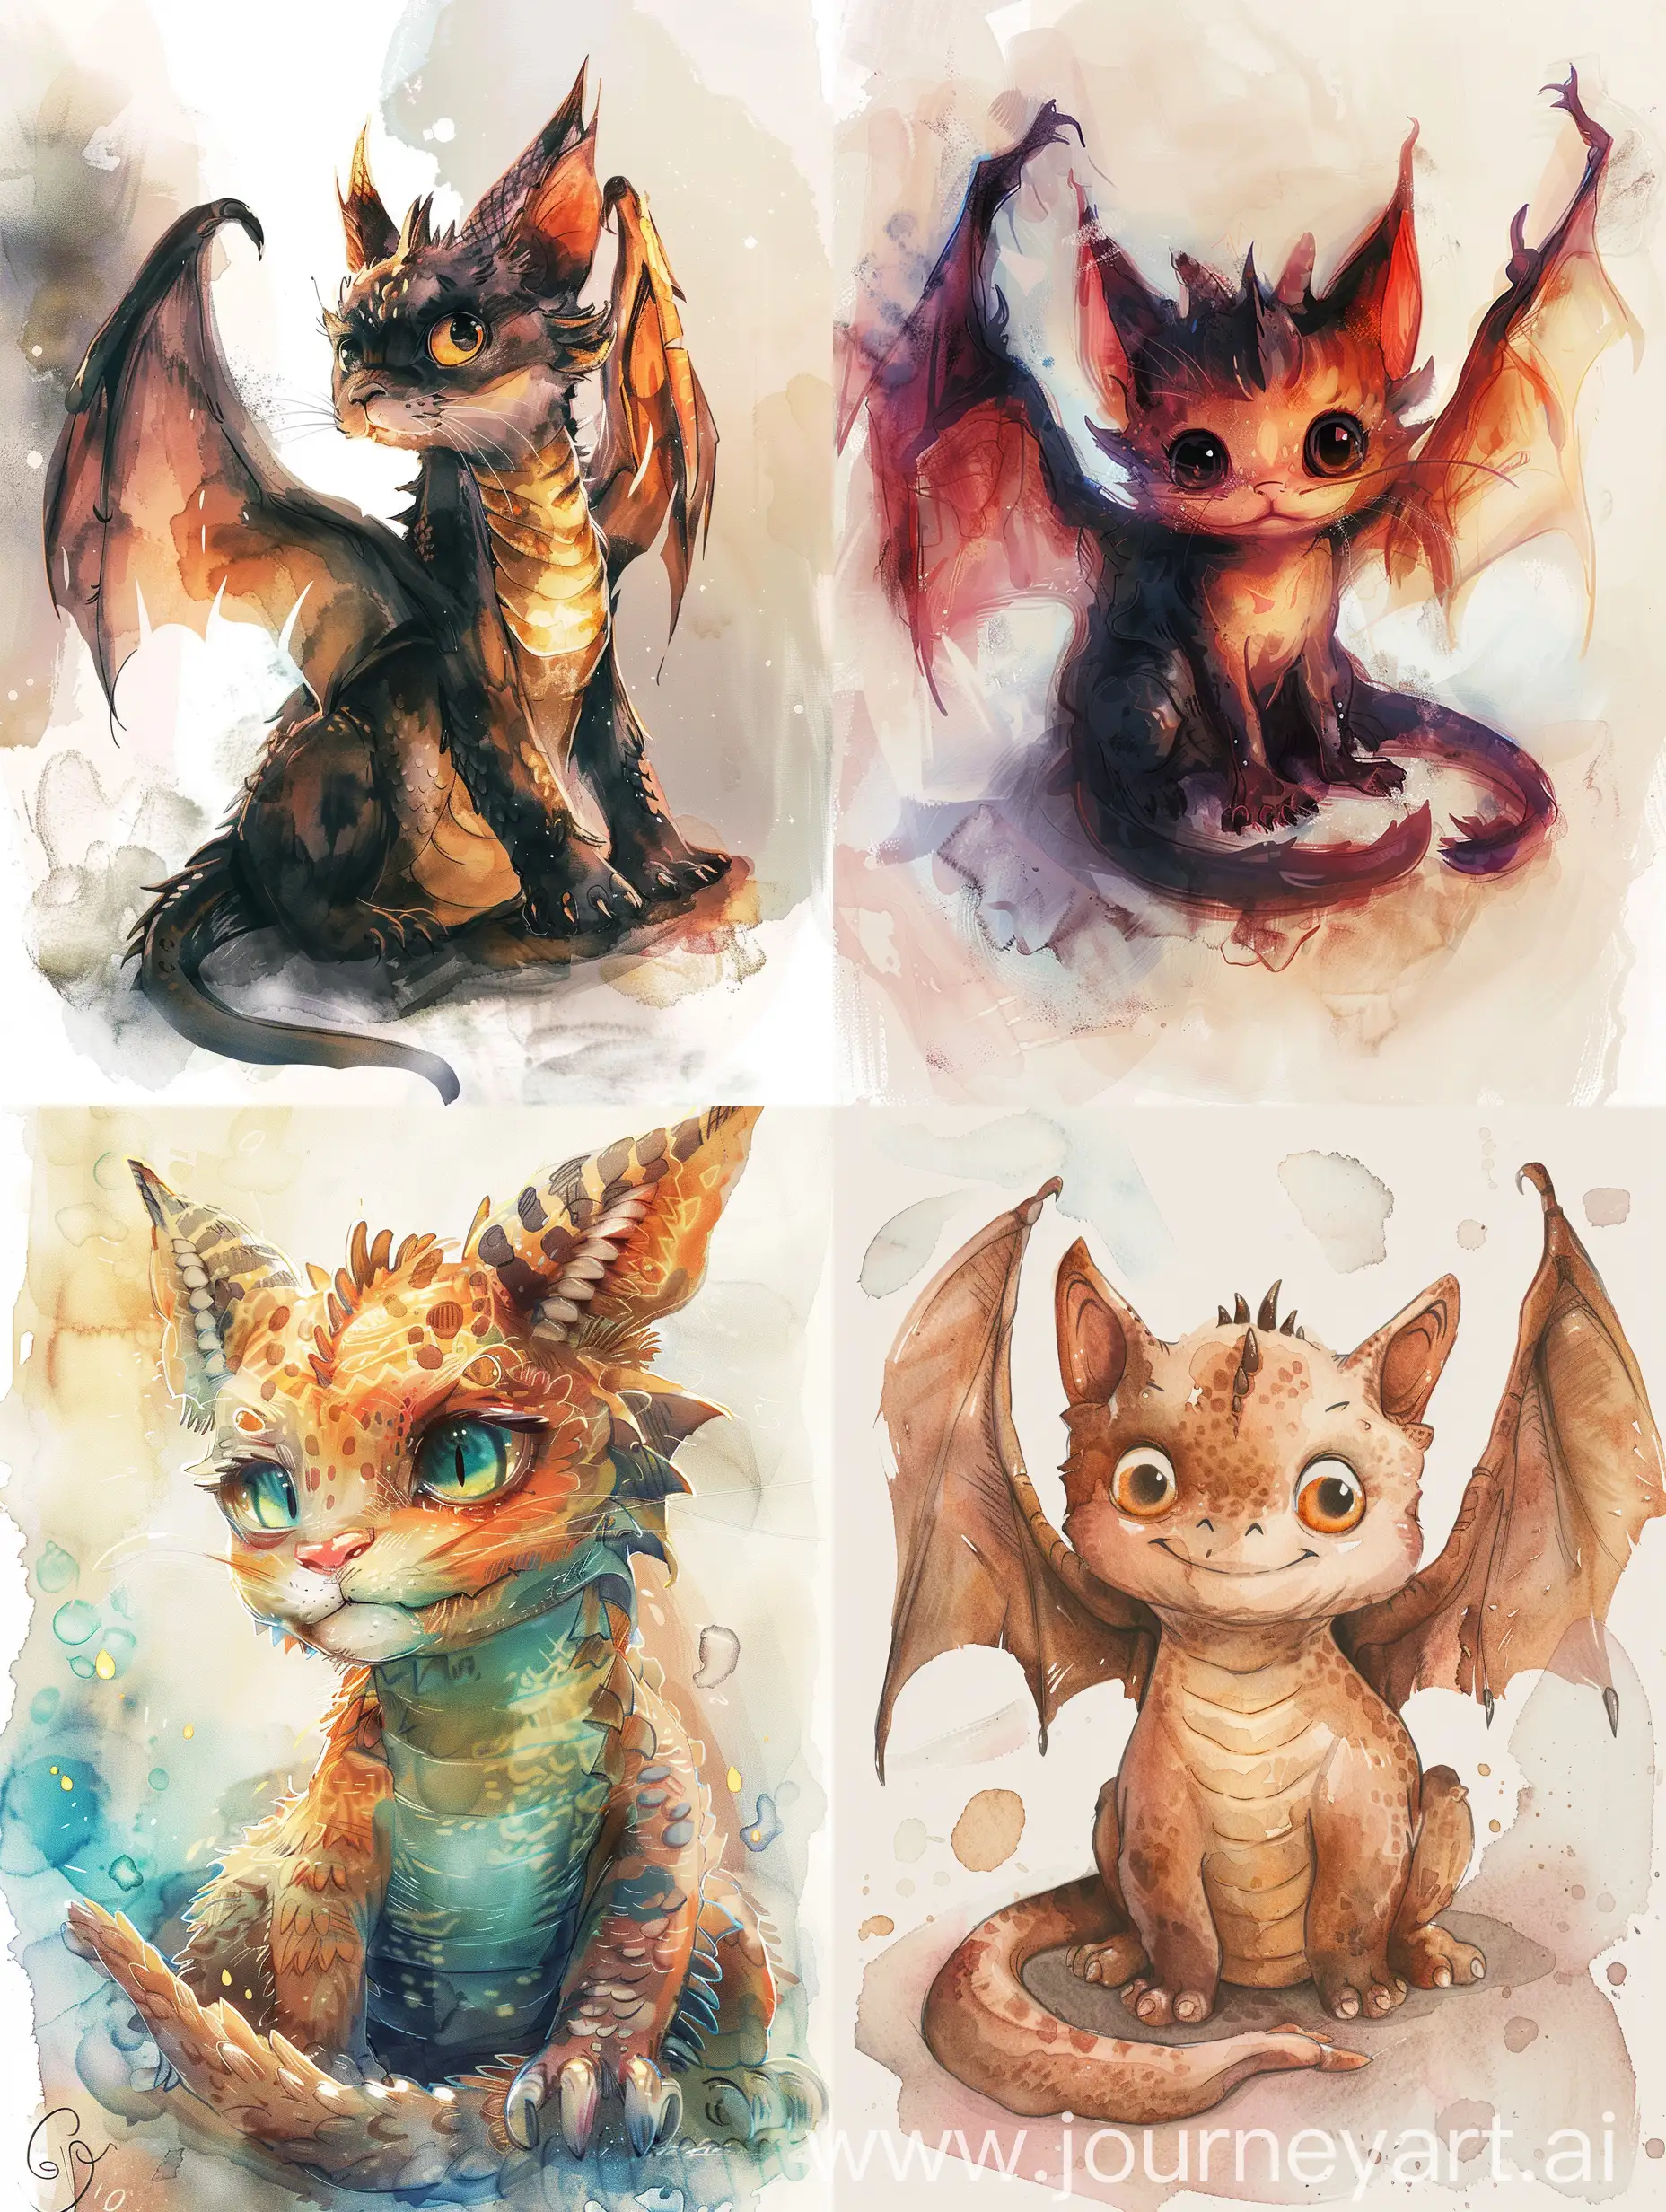 Adorable-6YearOld-Dragon-Cat-in-Anime-Watercolor-Style